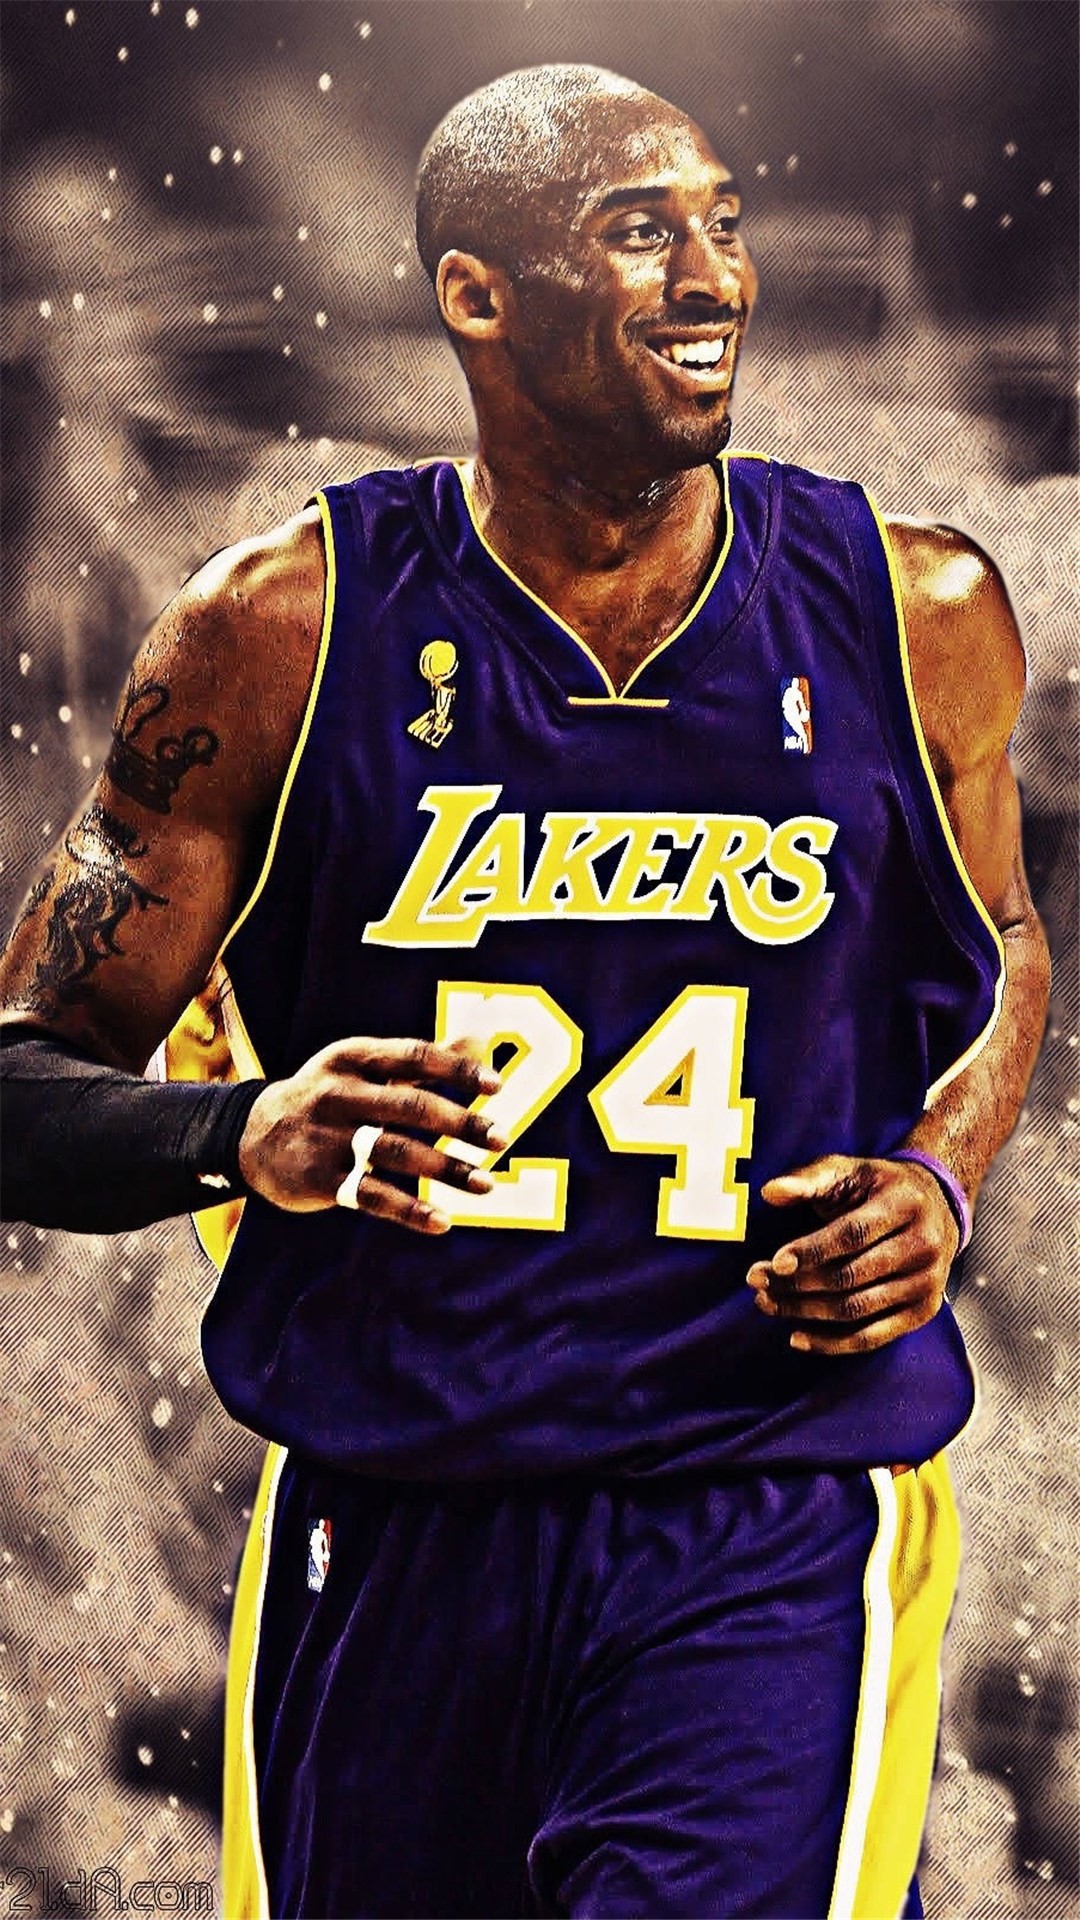 Cool Nba Wallpaper For iPhone Image